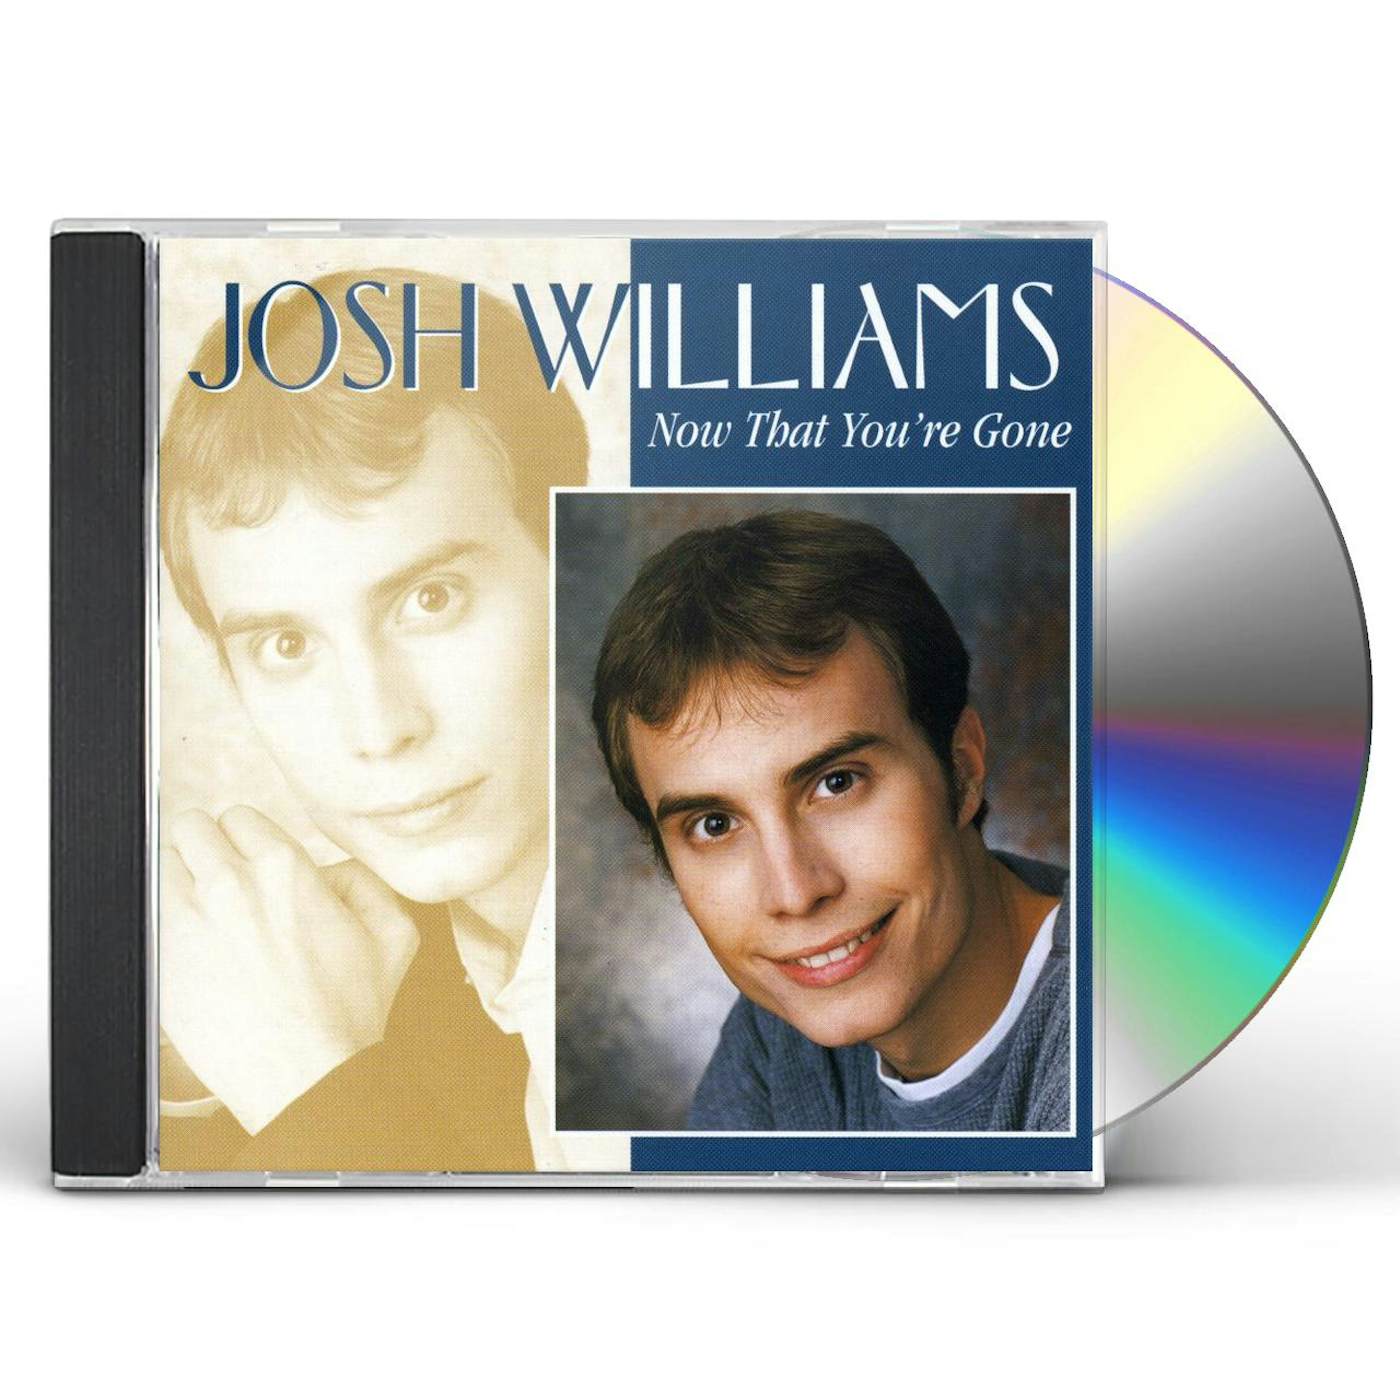 Josh Williams NOW THAT YOU'RE GONE CD